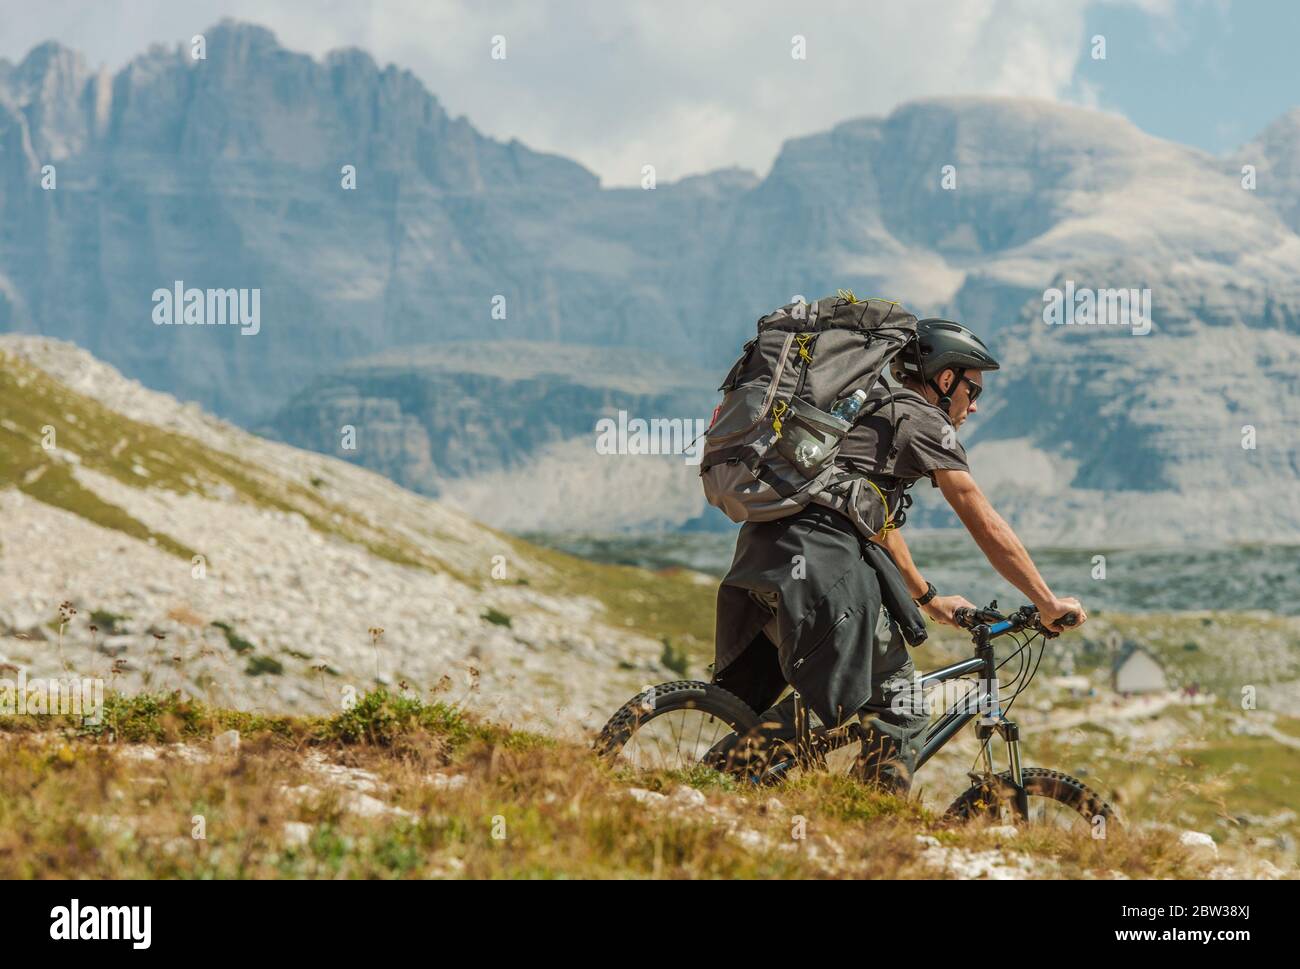 Caucasian Biker in His 30s Wearing Large Backpack Riding on the Mountain Trail in Italian Dolomites near Misurina, Italy. Outdoor Sports and Recreatio Stock Photo